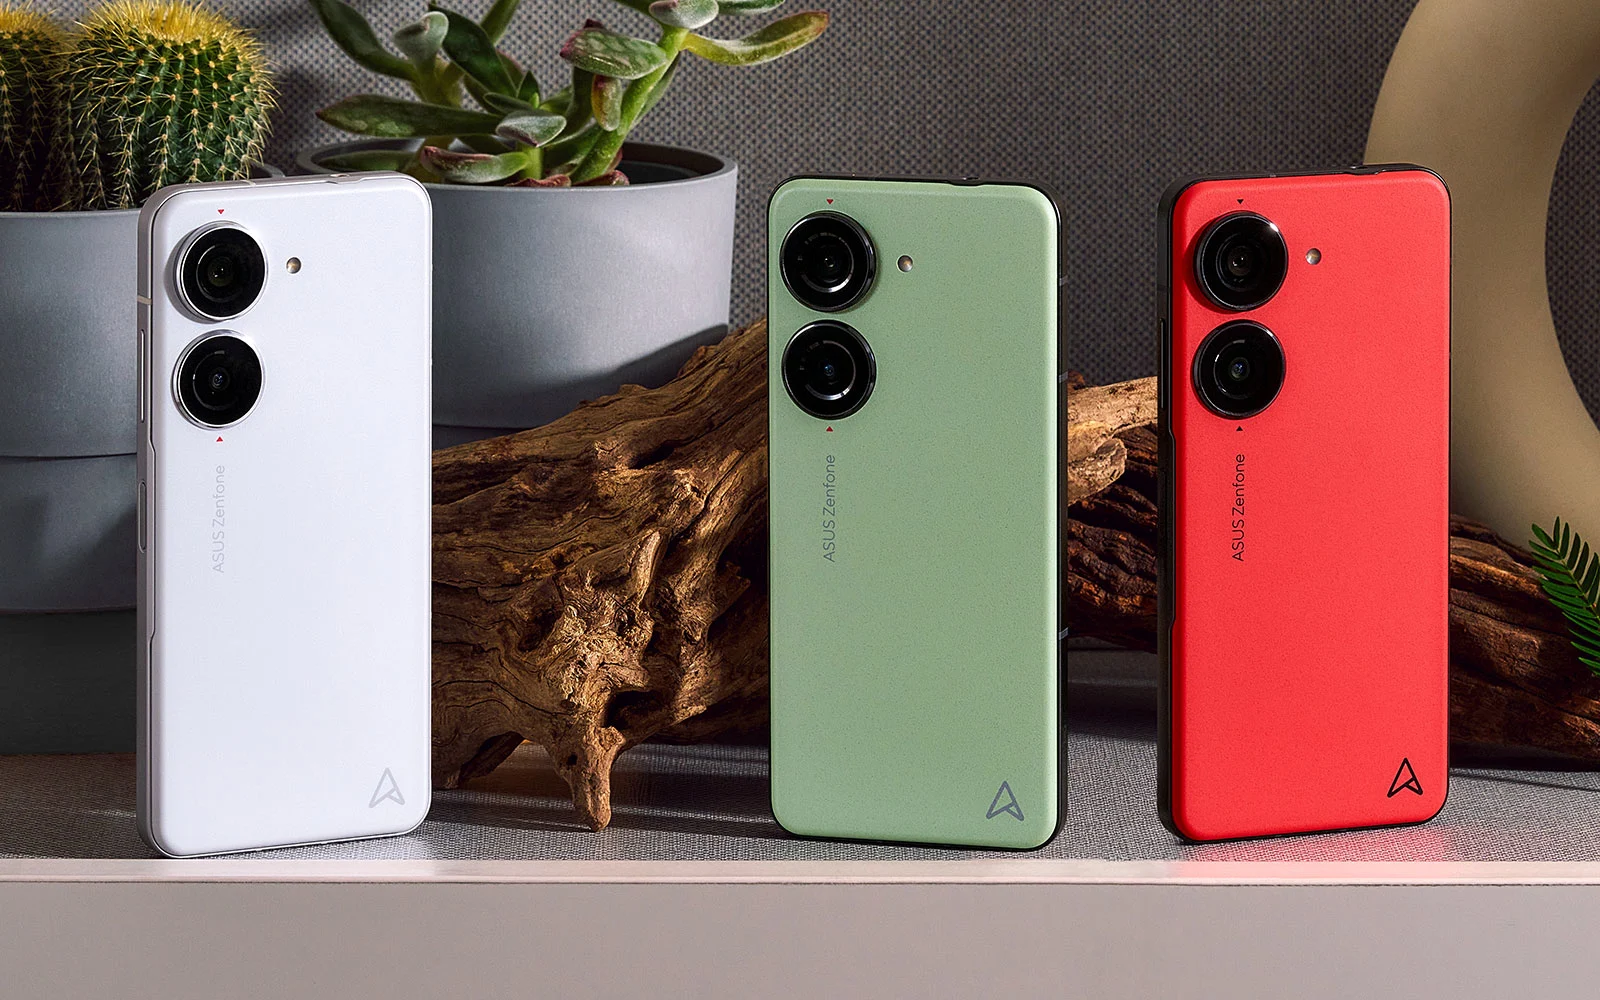 ASUS Zenfone 10 in white, green and red.